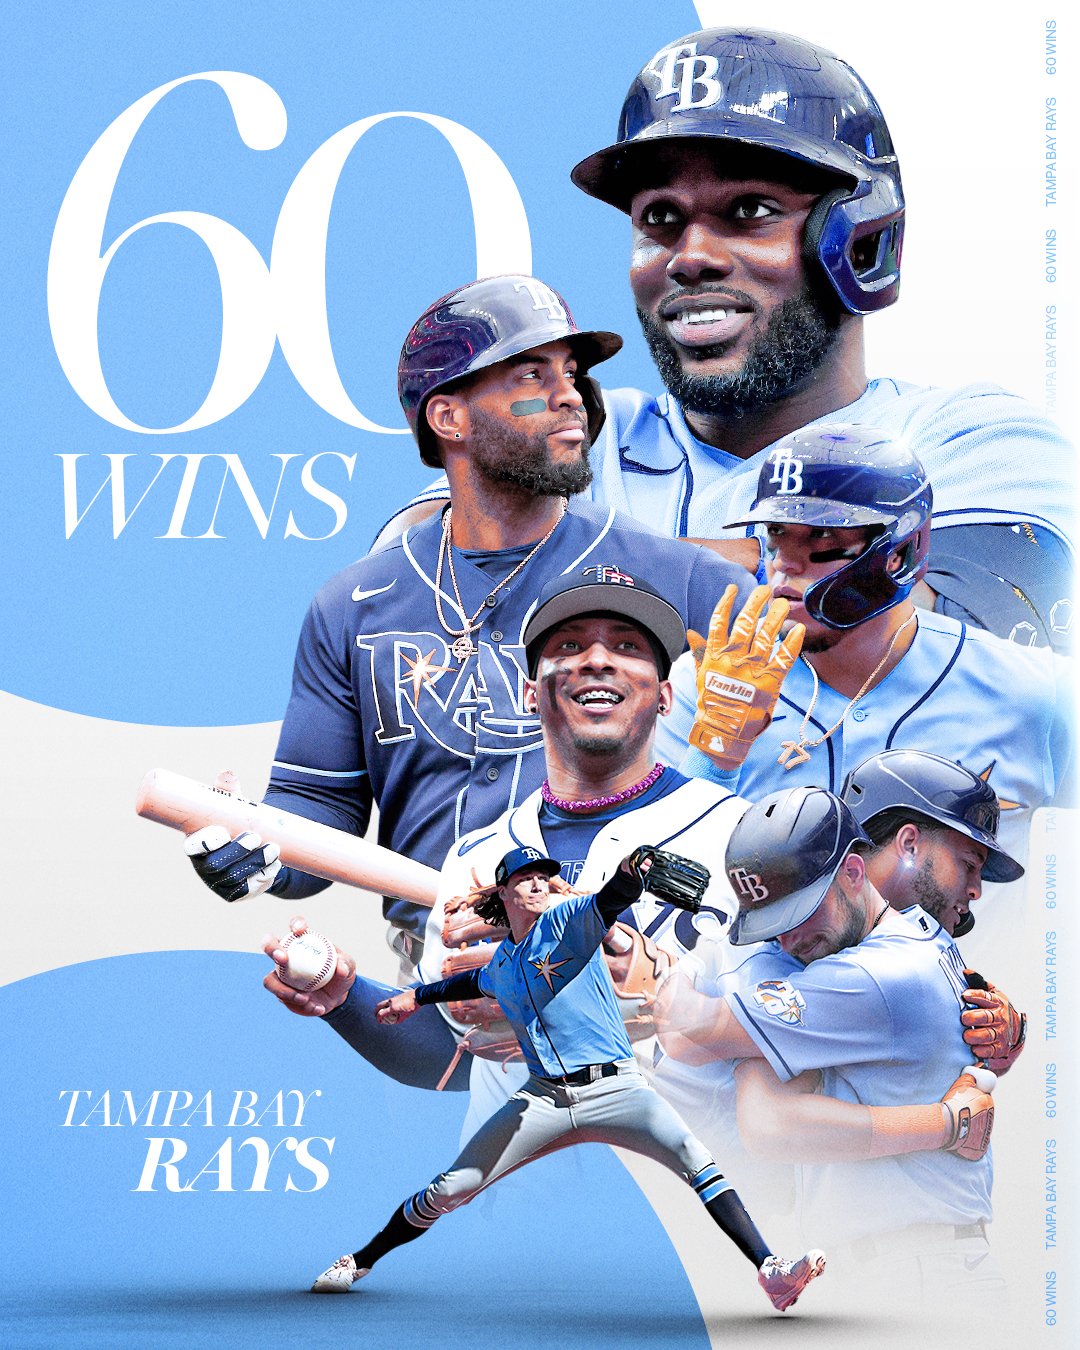 MLB on X: The first American League team to reach 60 wins